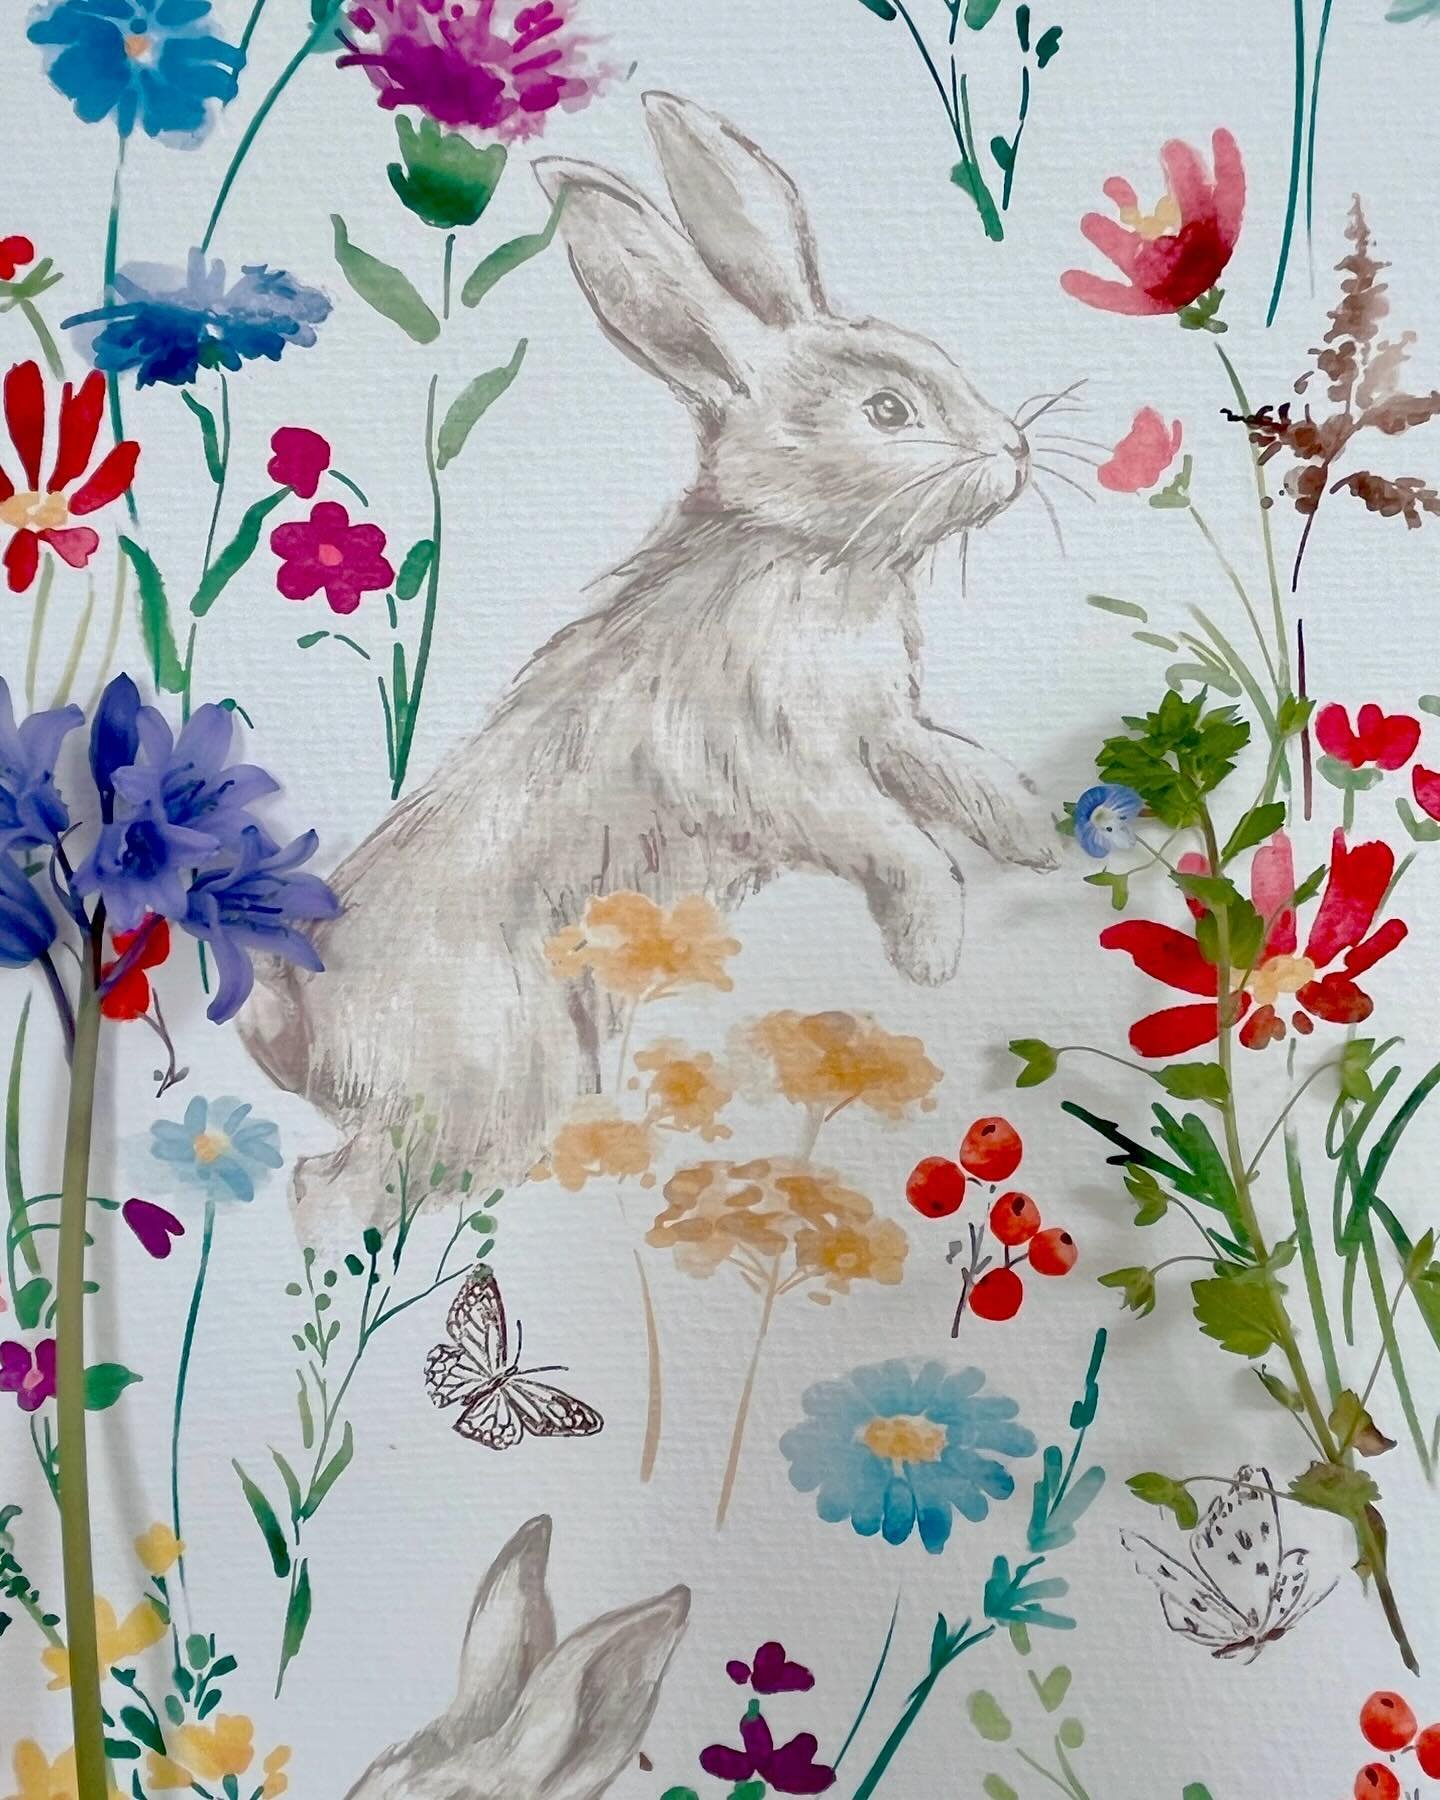 Hey, friends! Feeling the spring vibes too? 🌸🐰 It&rsquo;s my take on the beauty of this season, with vibrant flowers and playful rabbits. 🌼✨ Care to take a peek?
&bull;
&bull;
#textiledesign #beddingdesign #hometextiles #hometextiledesign #springf